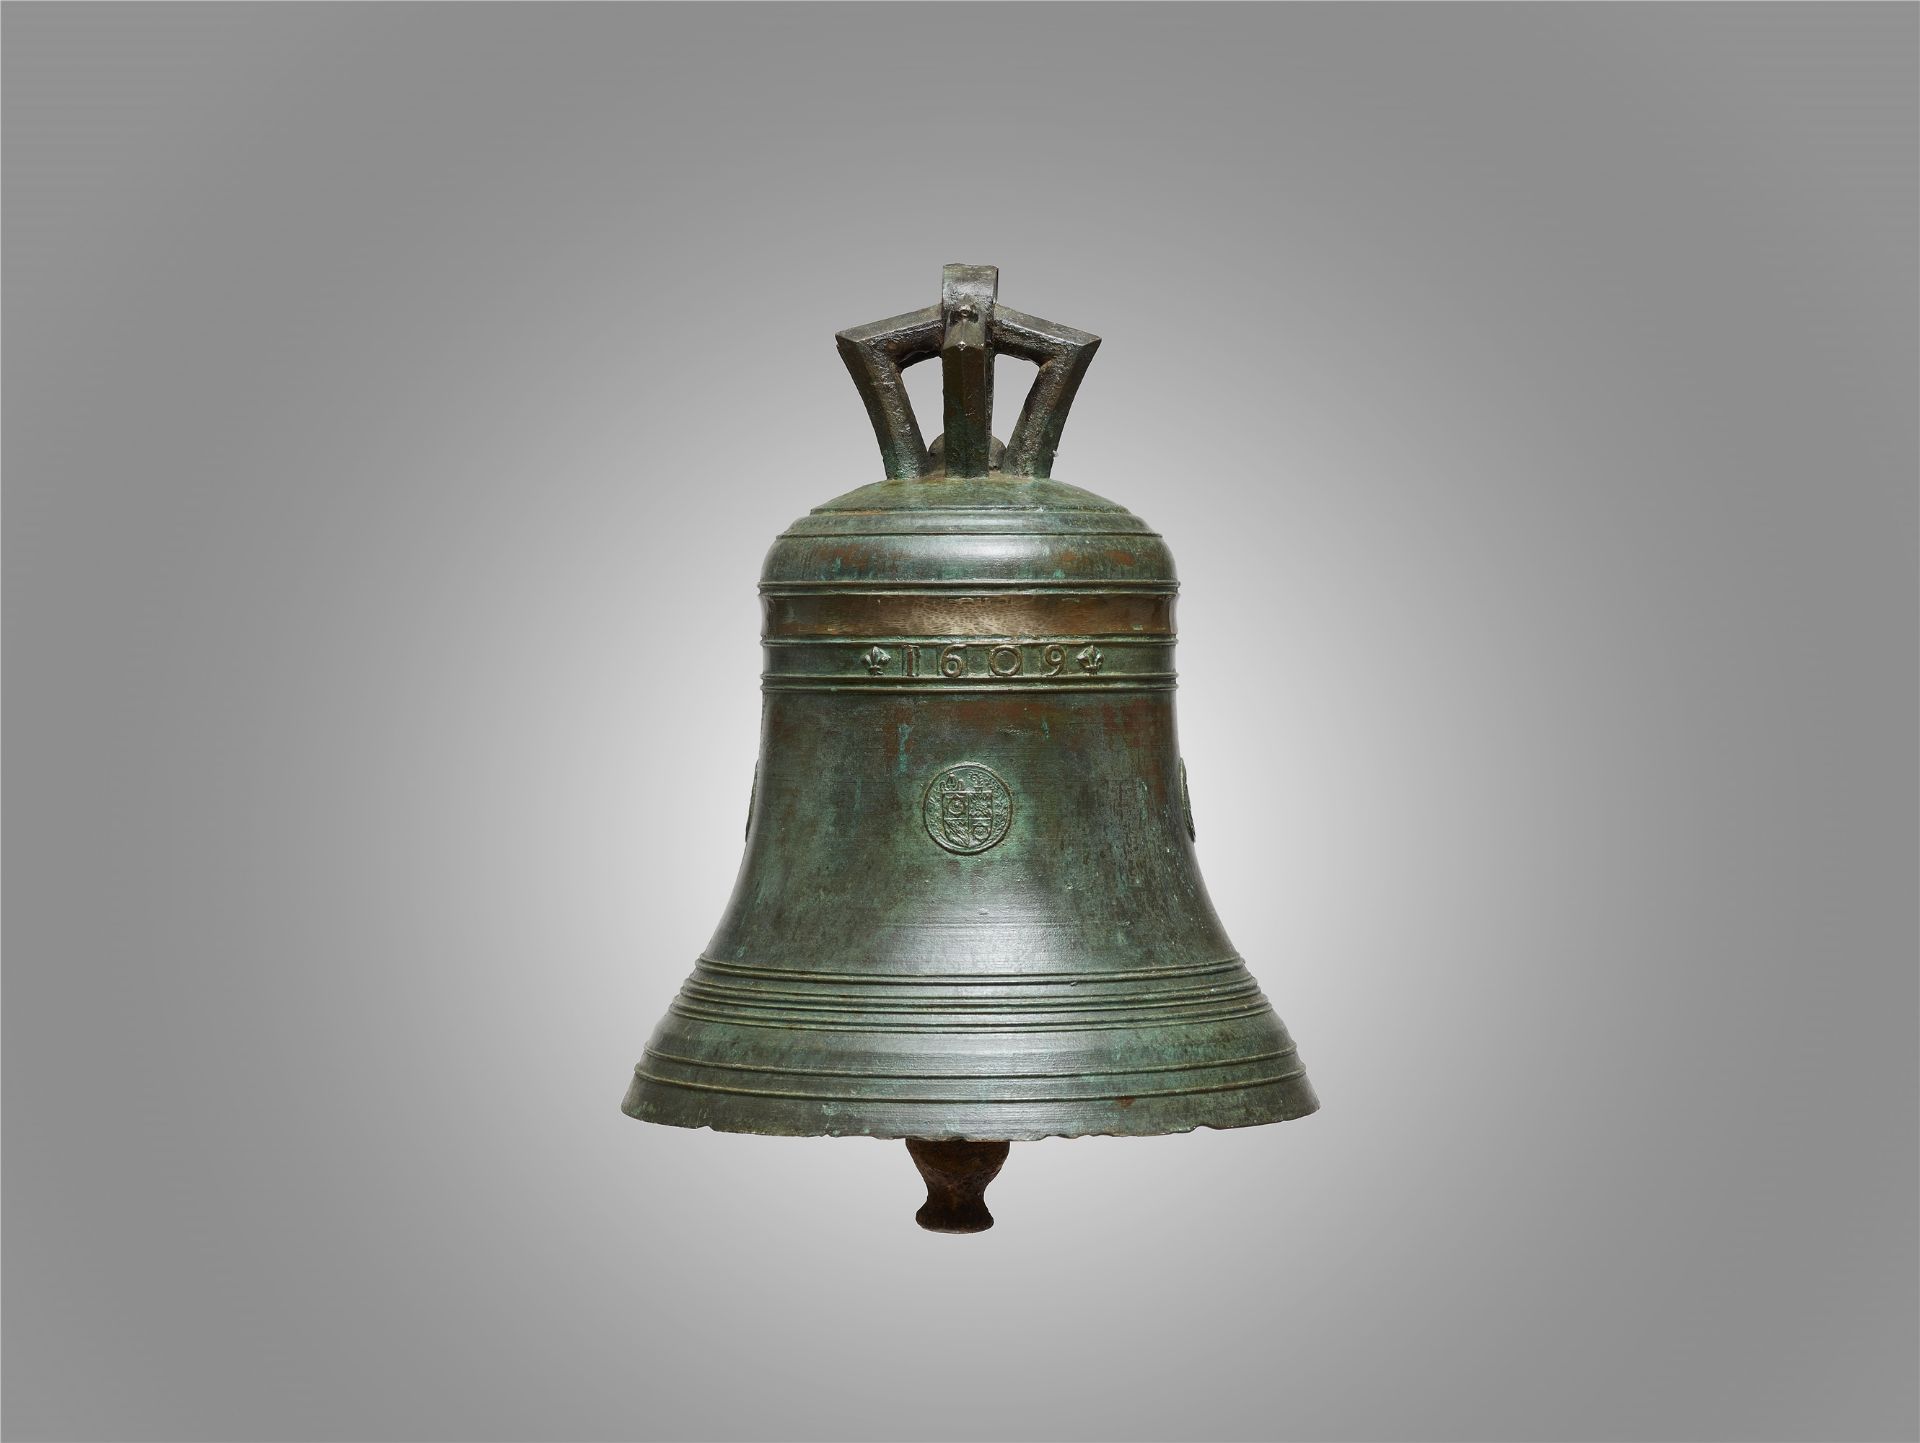 A rare bronze mission bell from 1609 - Image 2 of 5